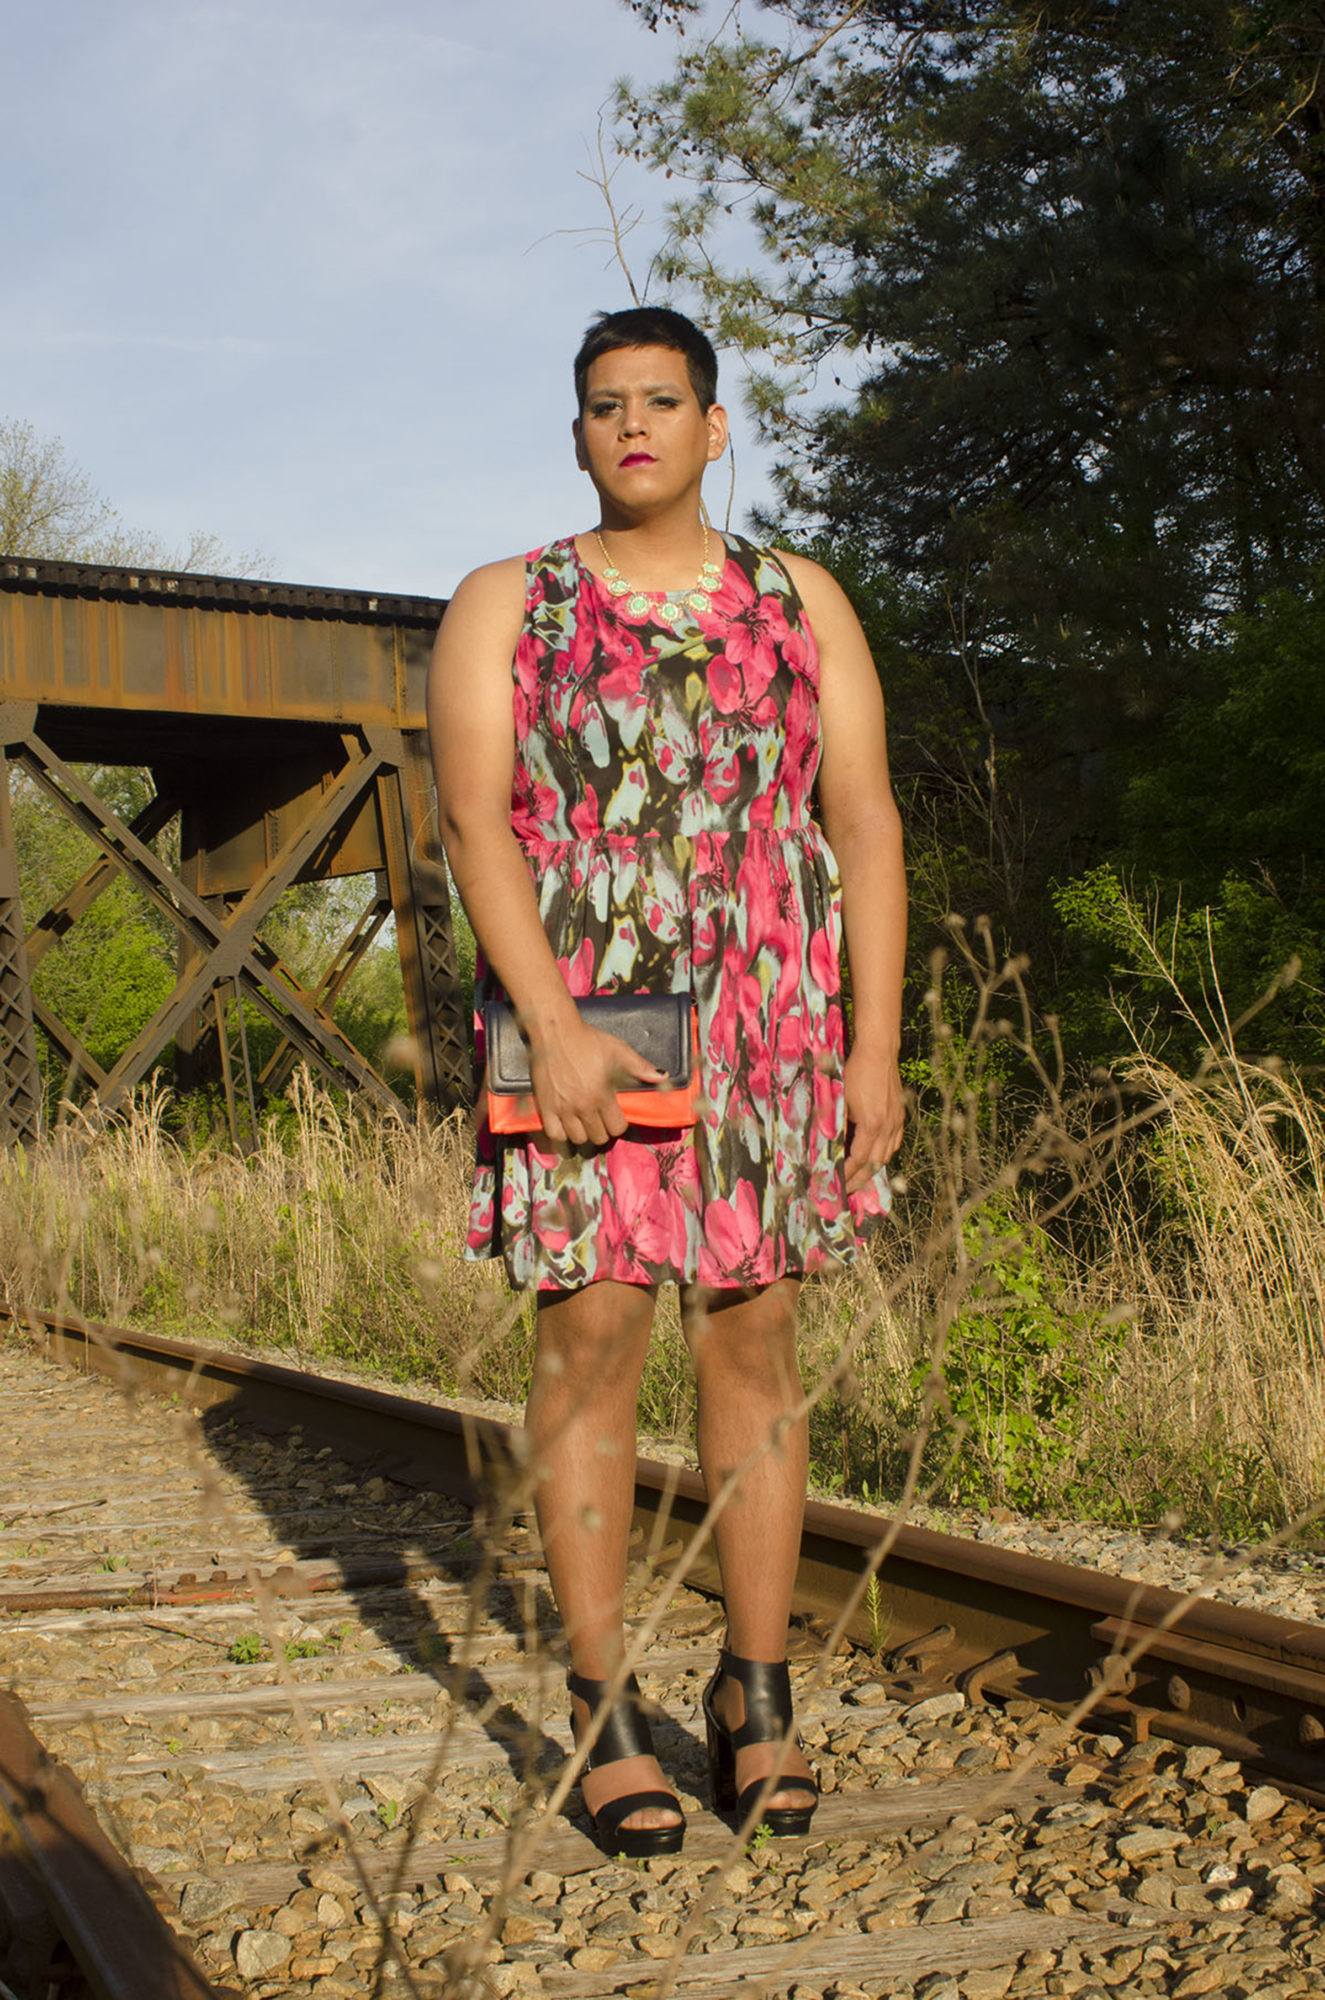 A person stands in a floral dress on train tracks